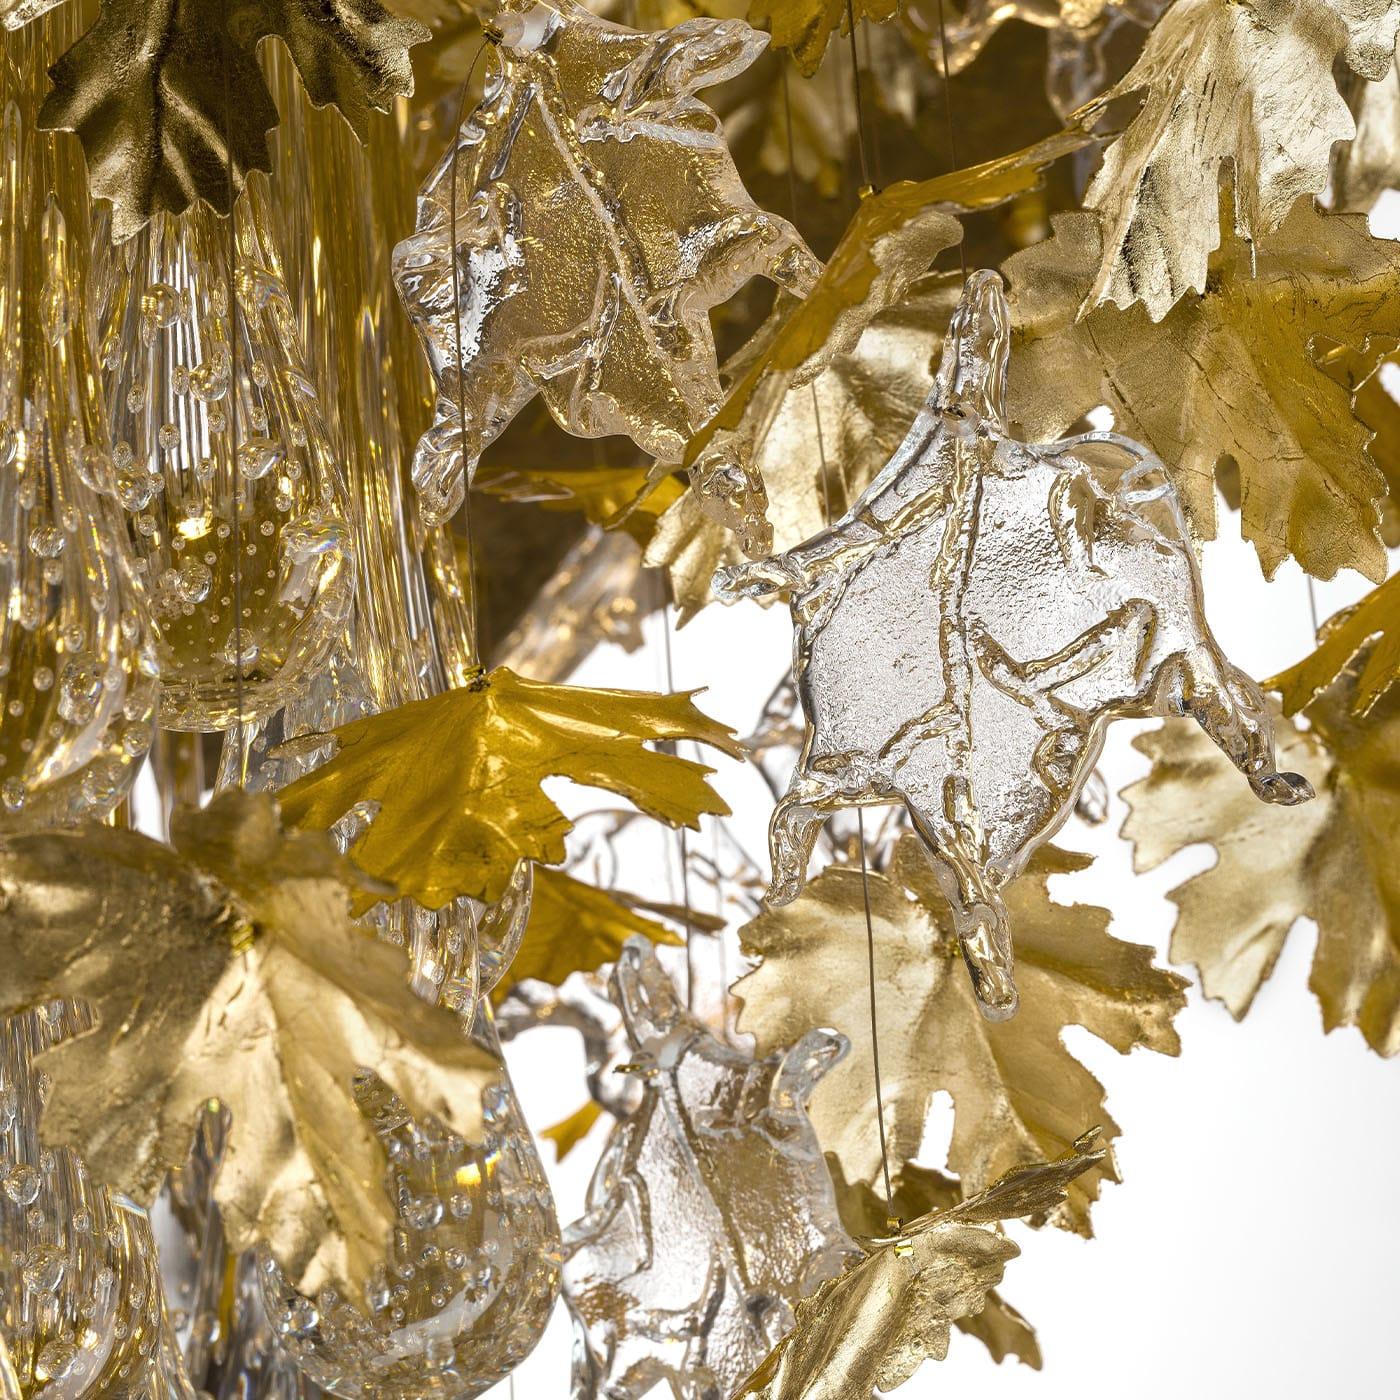 Sumptuous and refined, this majestic chandelier is an invitation to look up from our phones and admire a glorious composition of metal and glass maple leaves of tender naturalistic inspiration. The cascade of glass pendants sealing its tapered